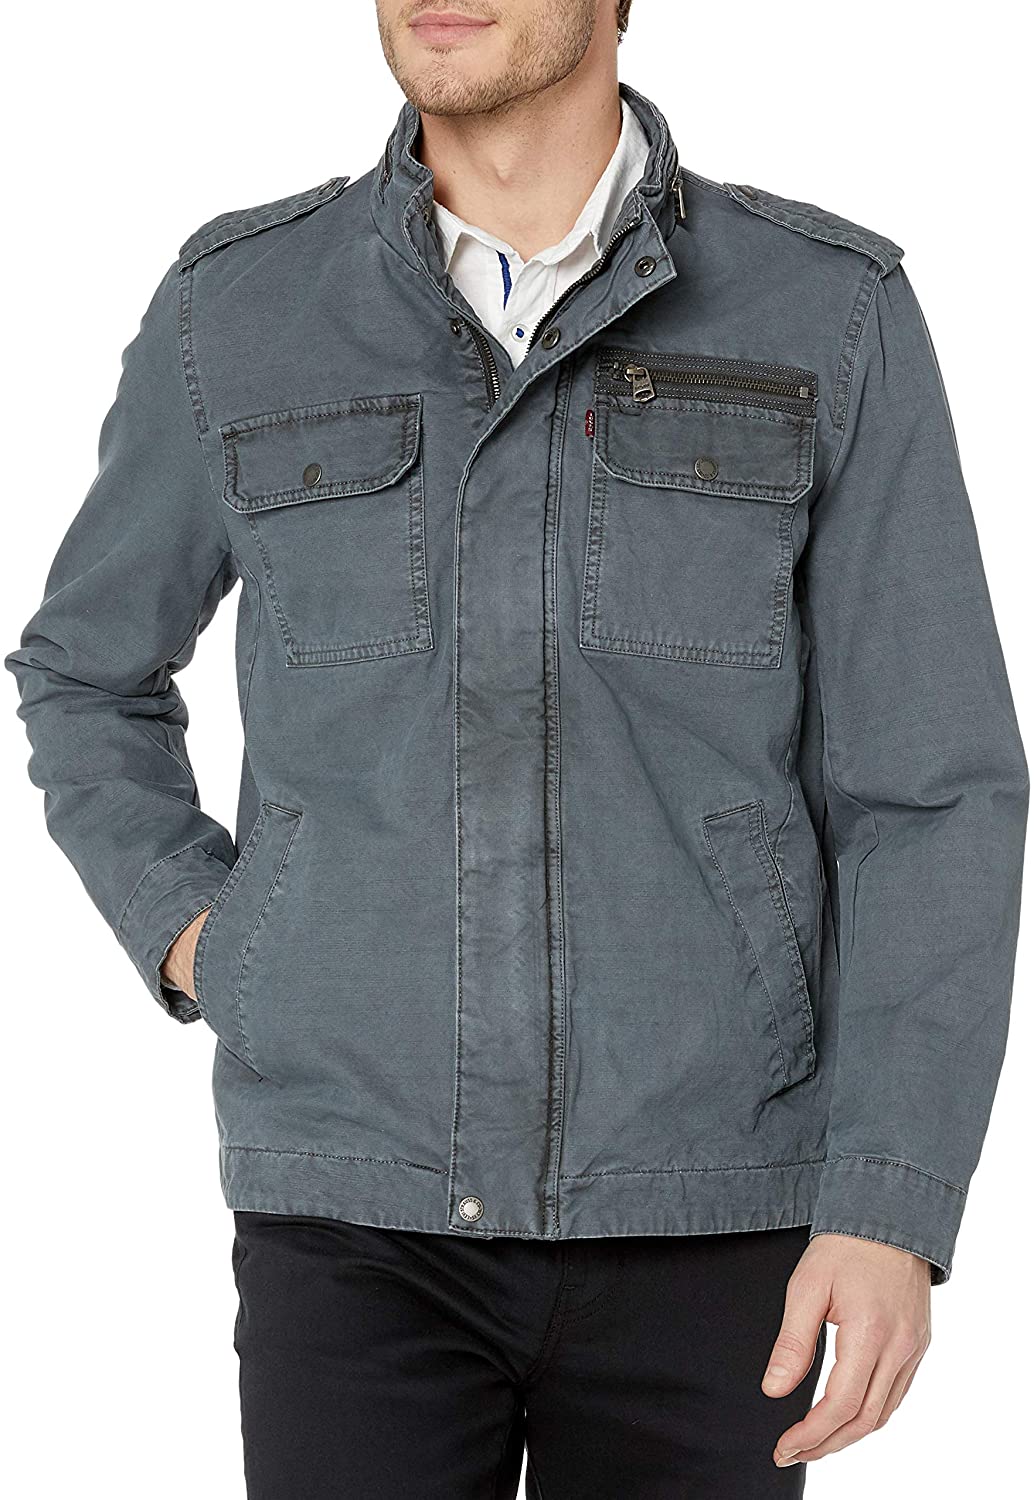 Levi's Mens Wool Blend Military Jacket - JCPenney